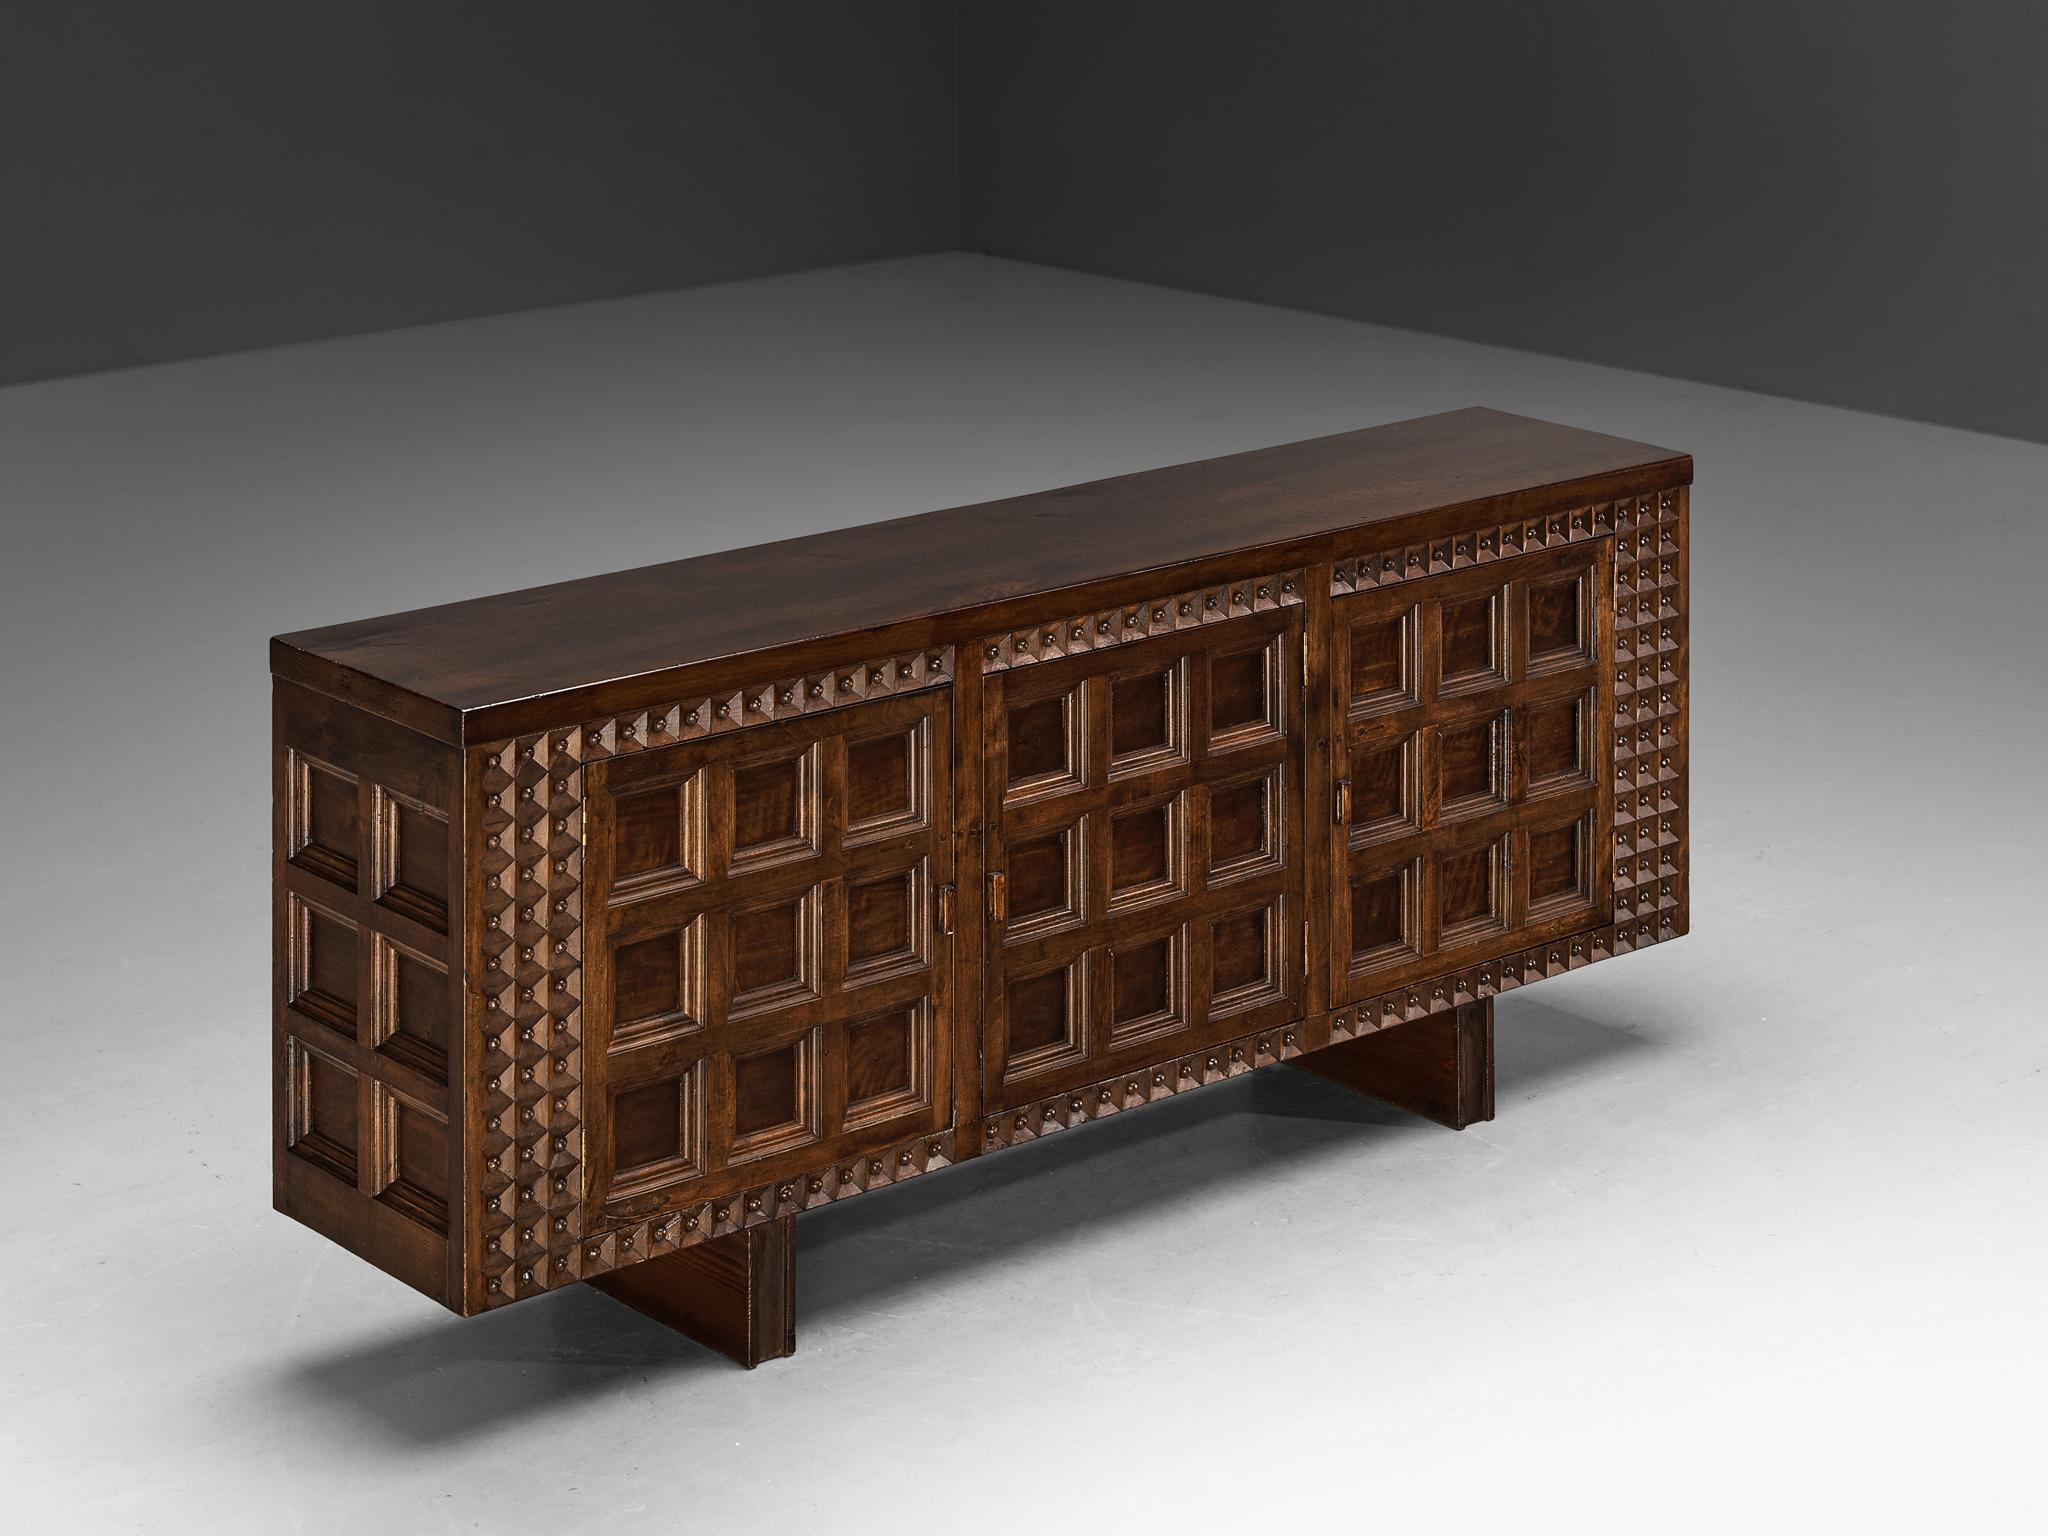 Credenza, field maple, Spain, 1960s 

This large cabinet originates from Spain and stylistically refers to the late 19th century Revival period. The embossed front is characterized by relief carvings with clearly defined squares. Its decorative